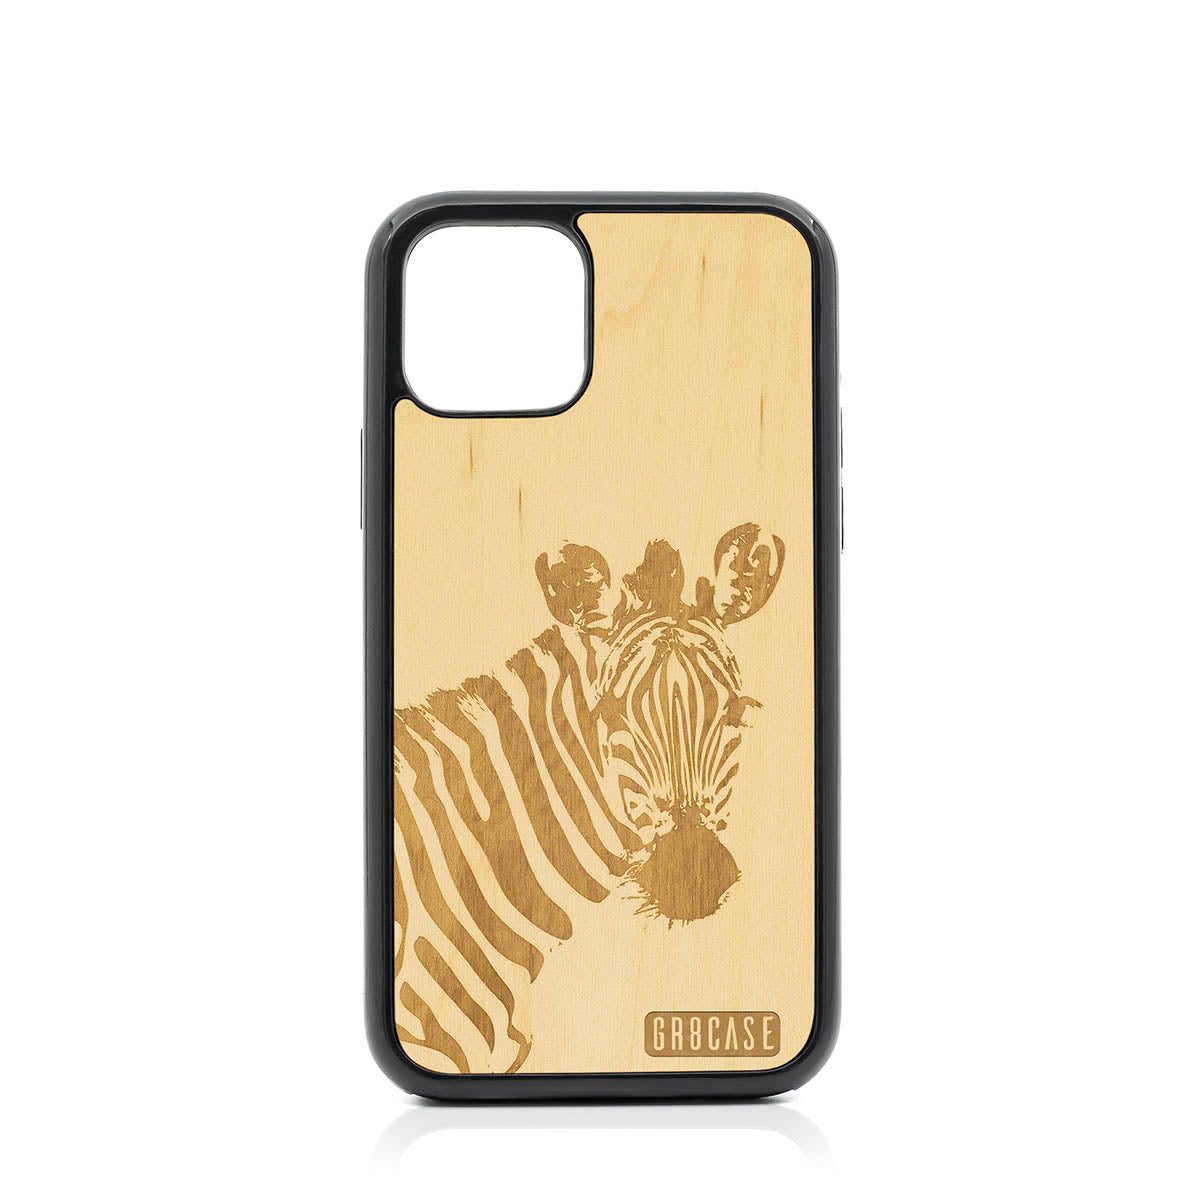 Lookout Zebra Design Wood Case For iPhone 11 Pro